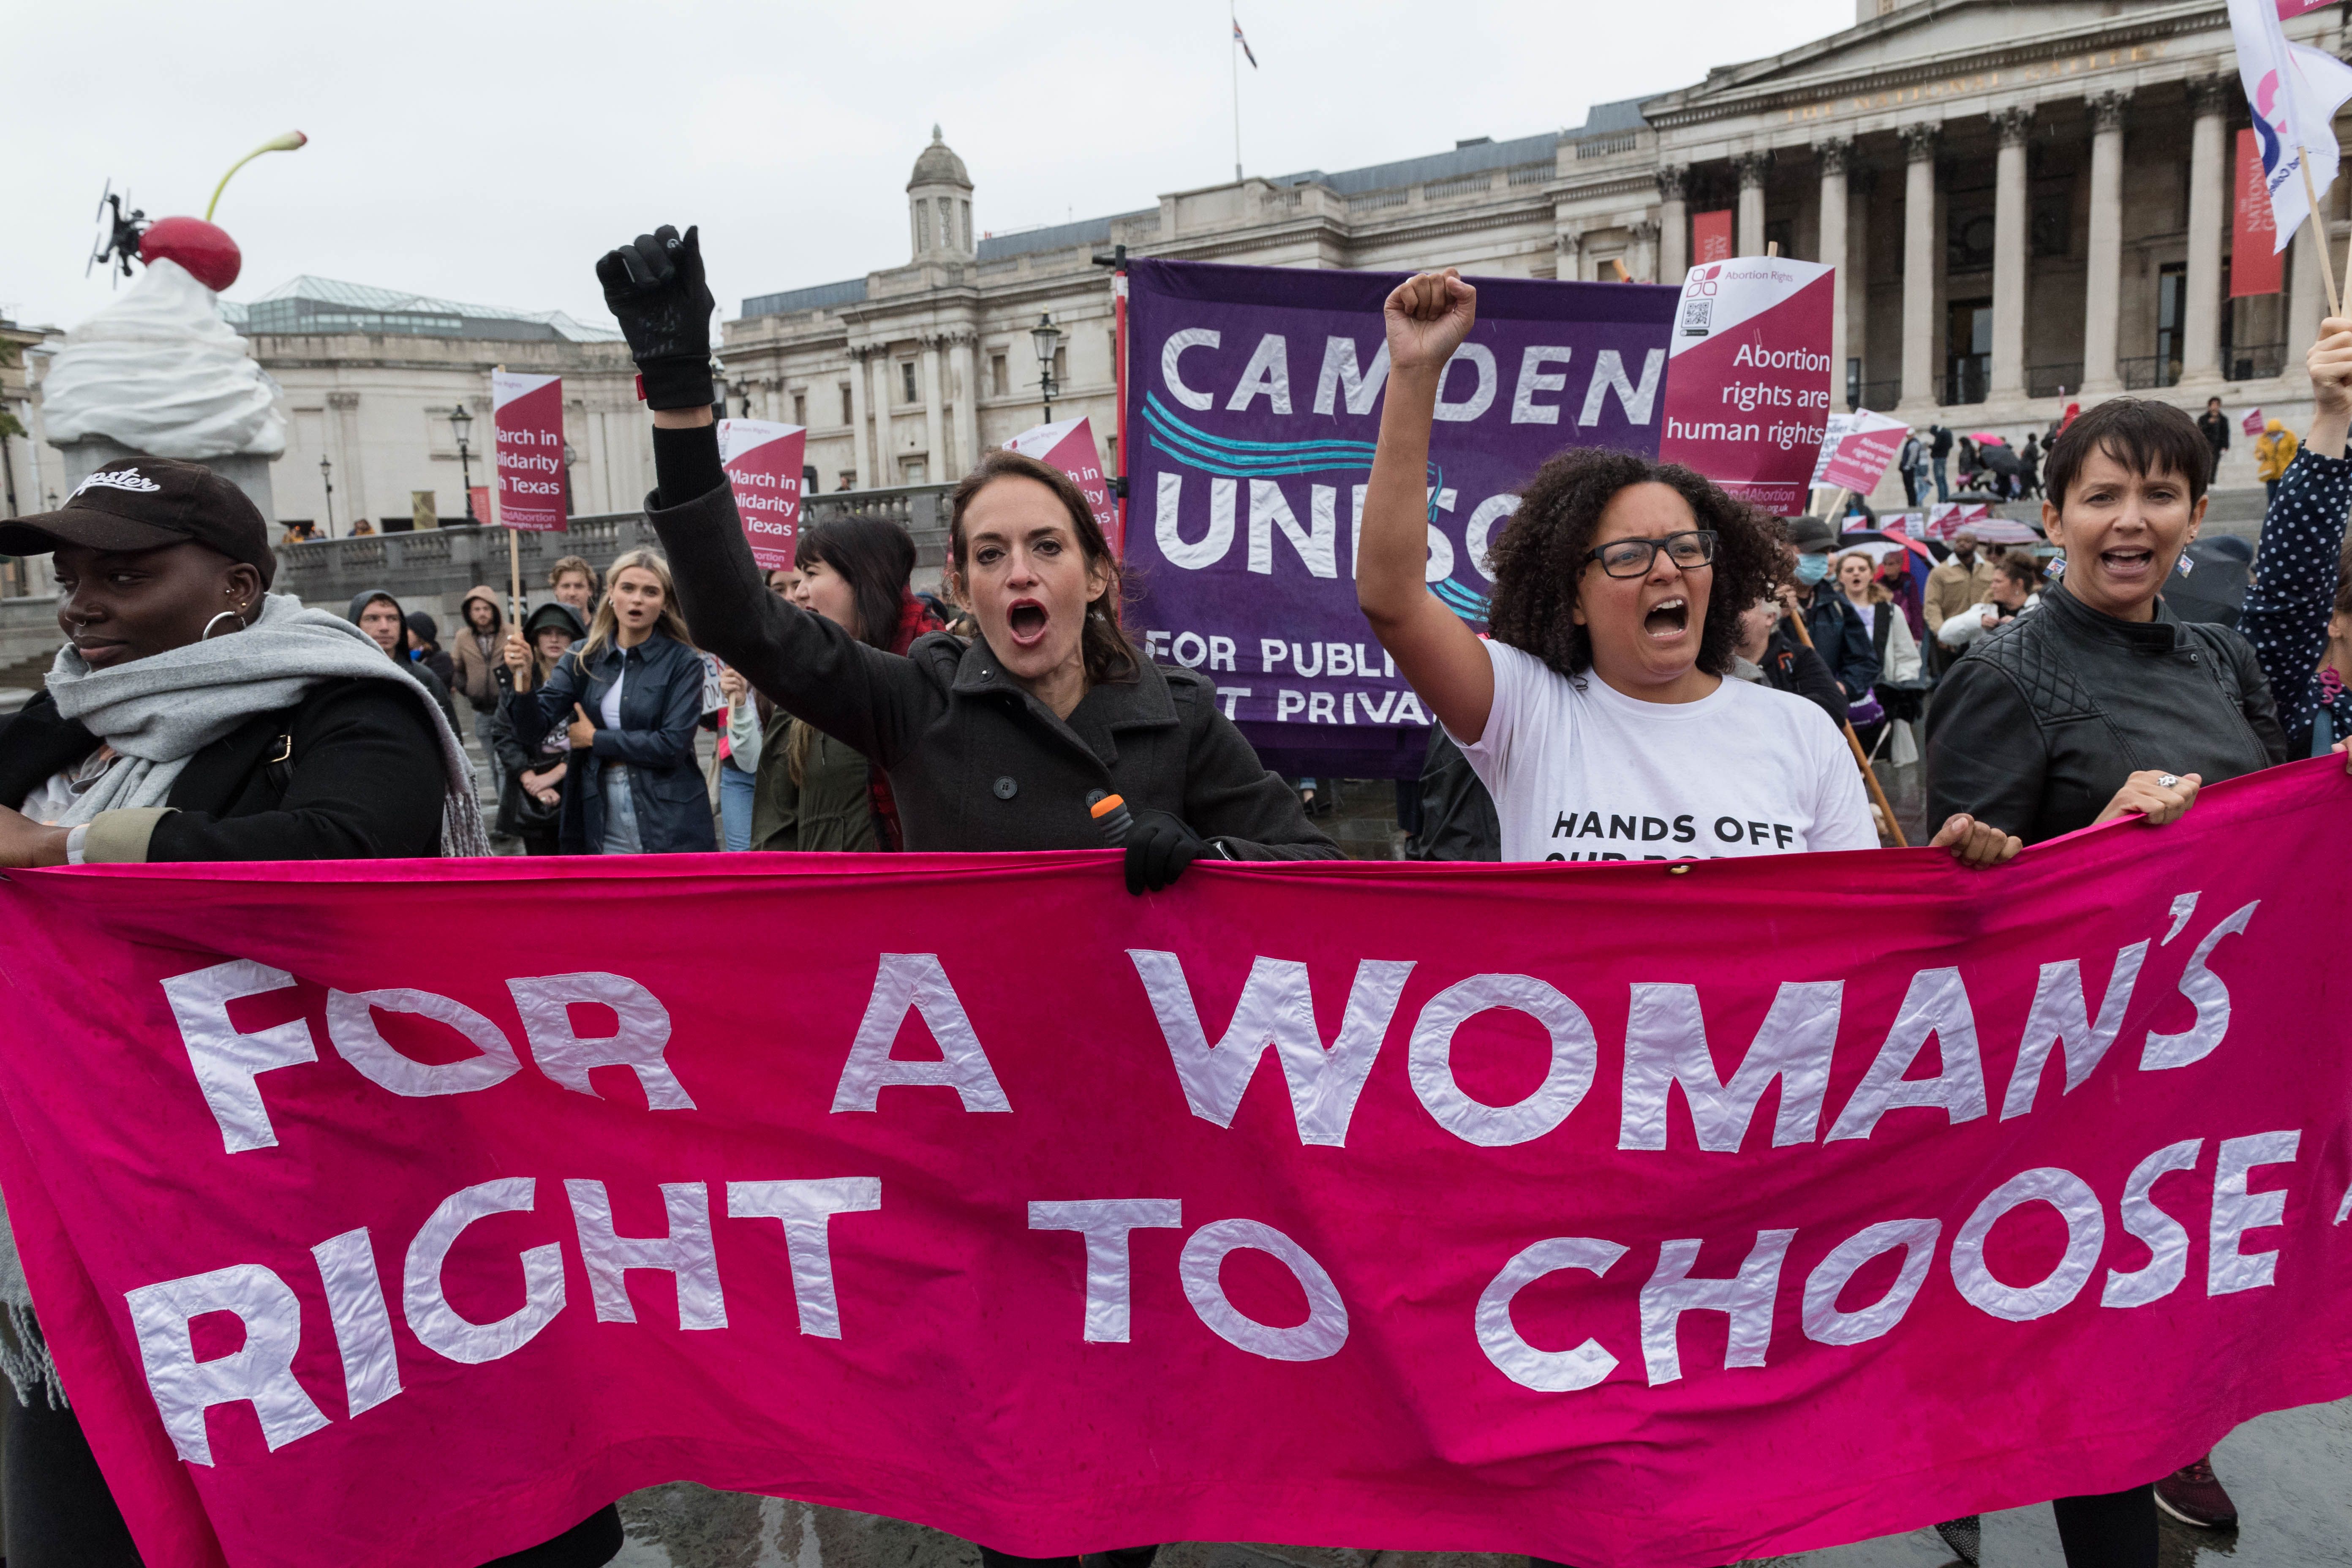 Pro-choice supporters marching through central London to the U.S. Embassy on Oct. 2.